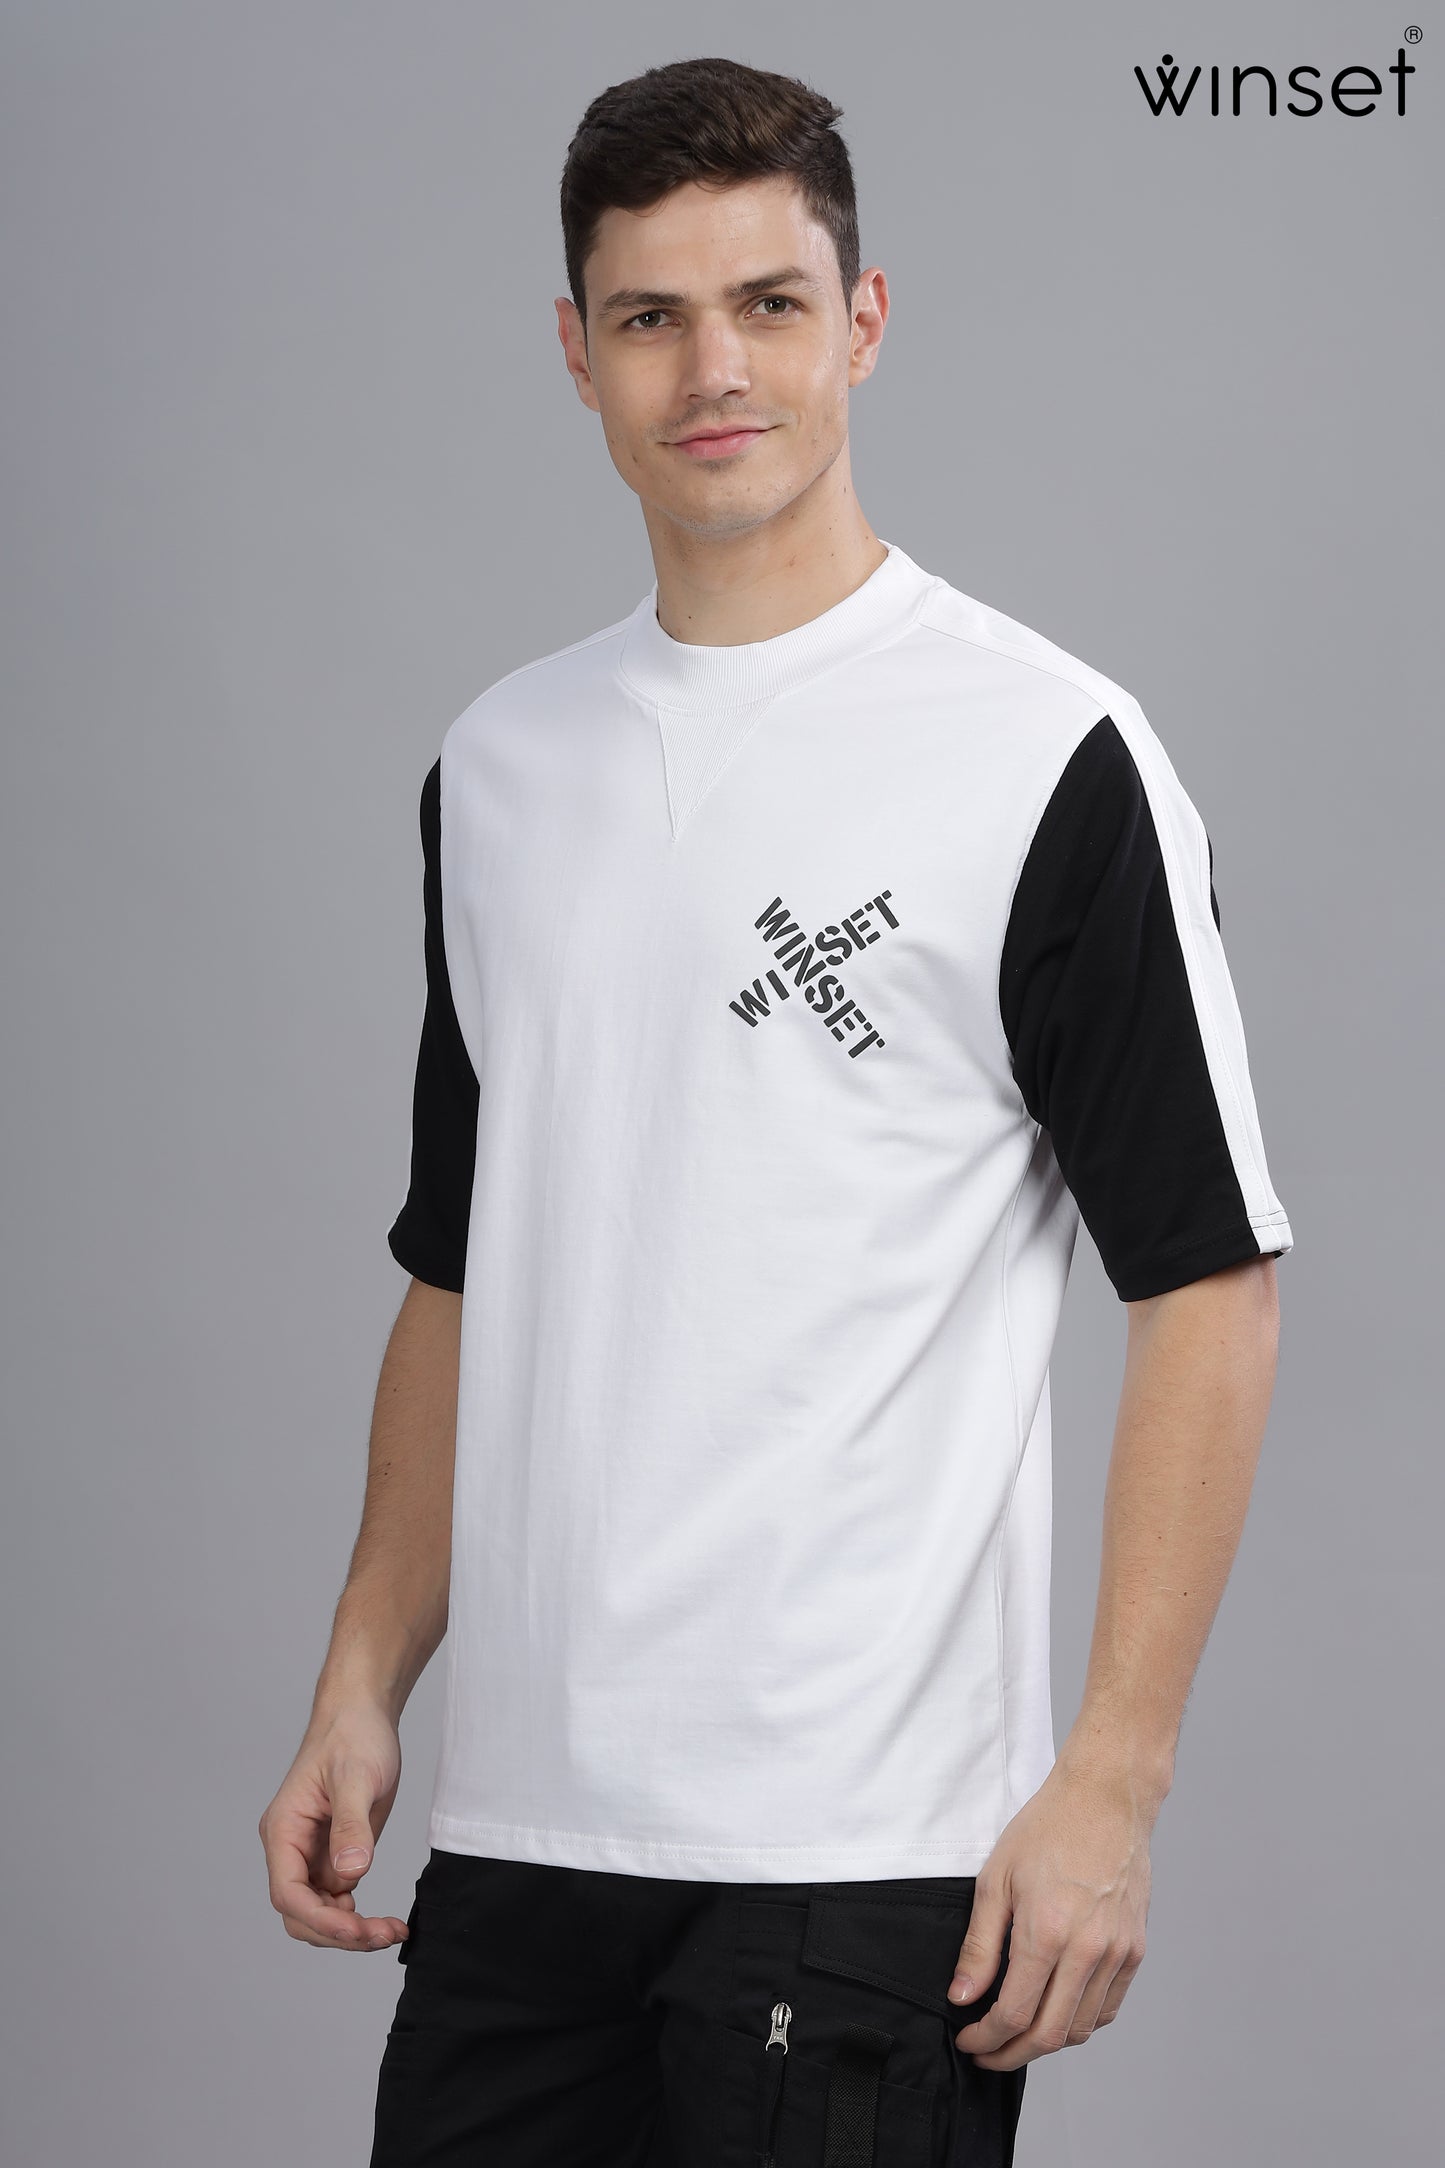 WHITE FIVE SLEEVE WINSET PRINTED